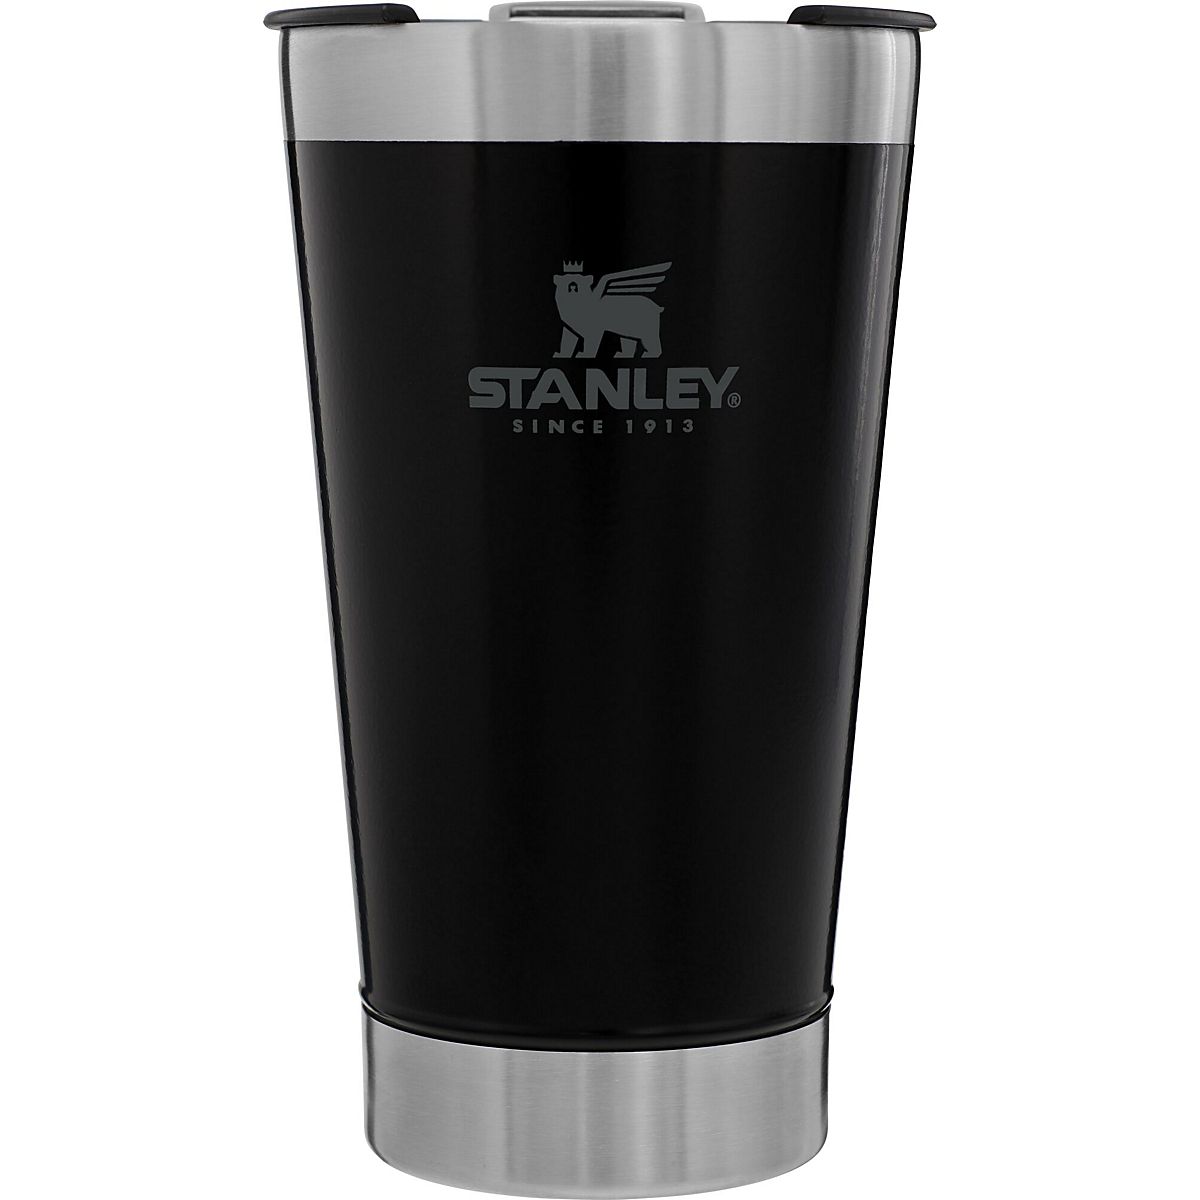 Stanley Classic Stay Chill 16 oz Beer Pint